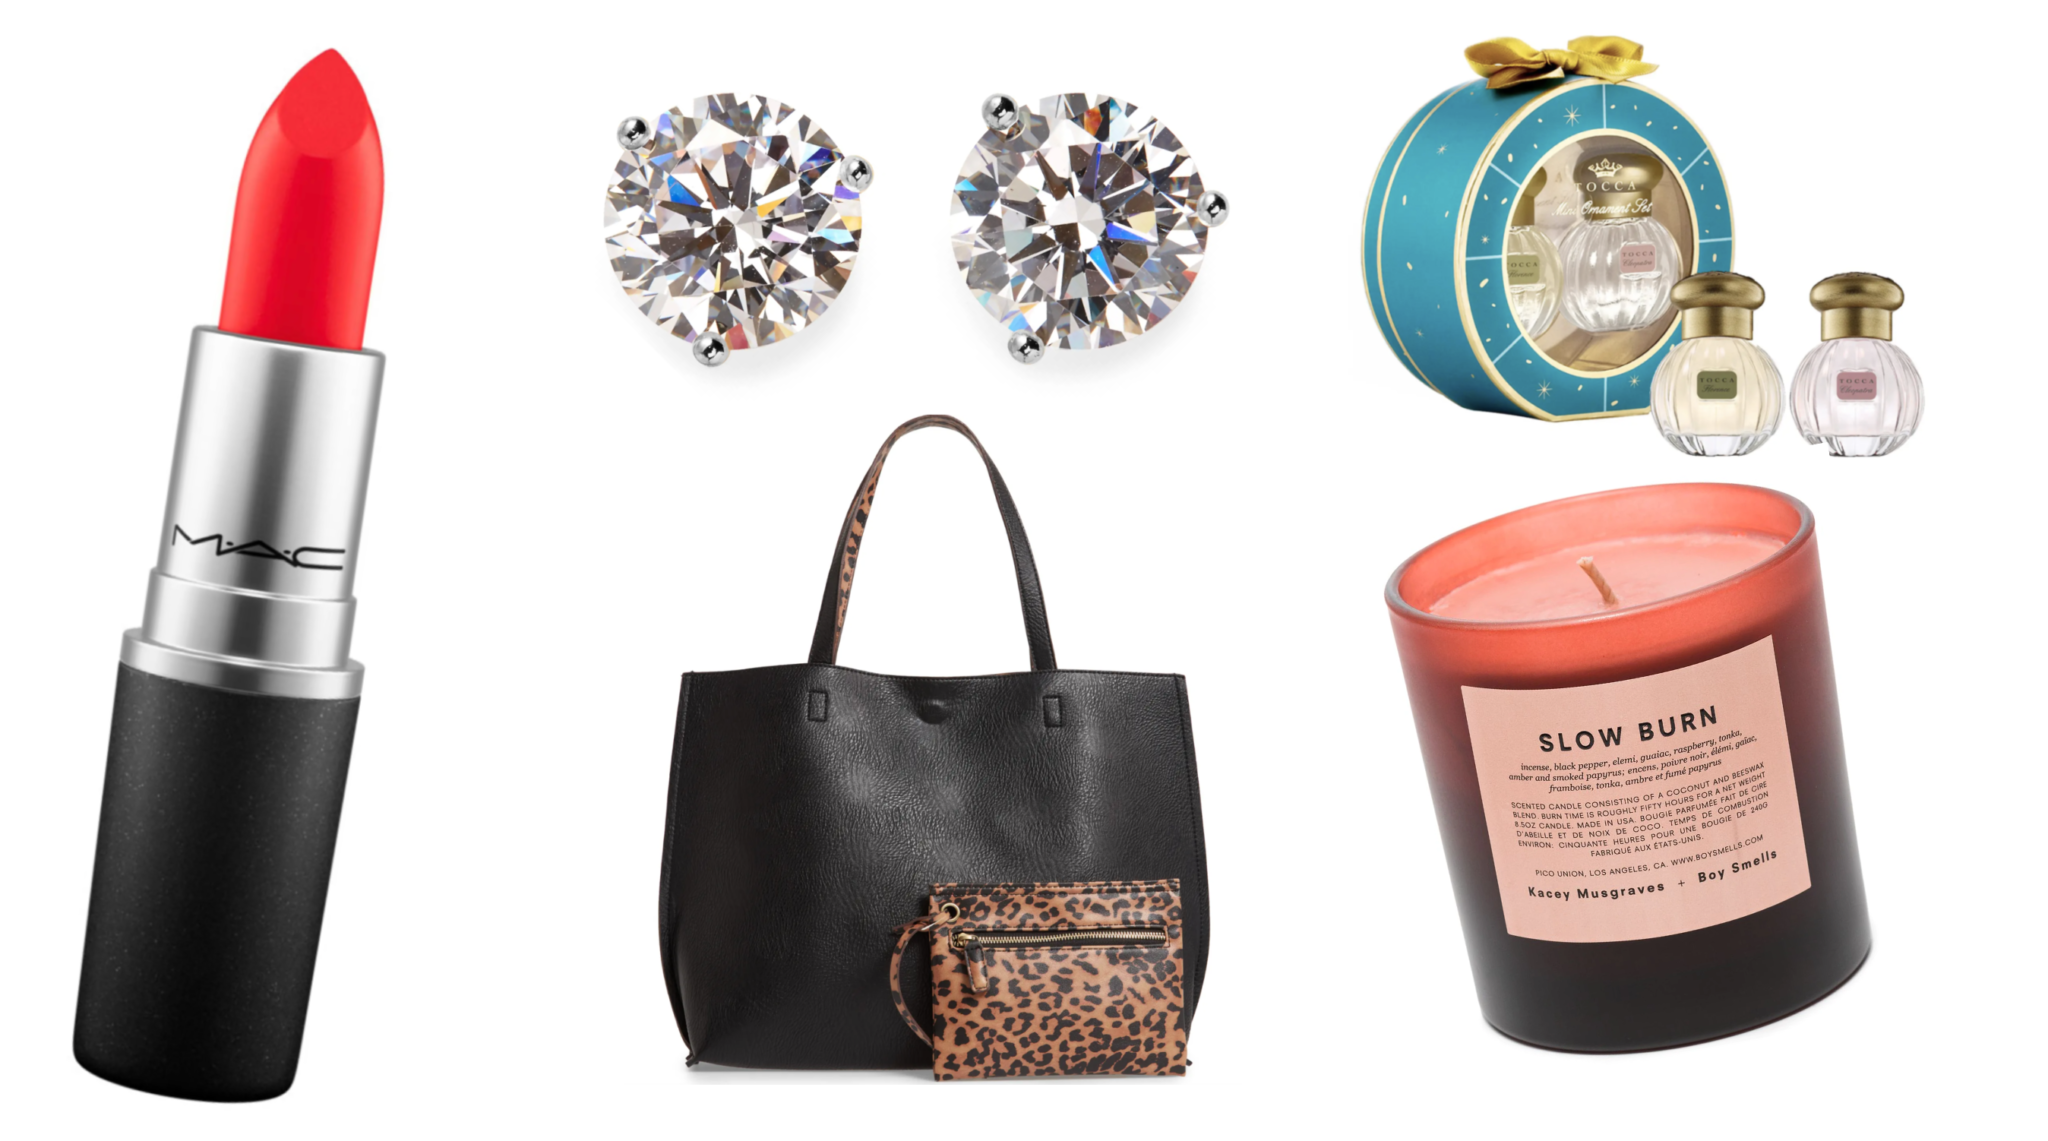 Even though it’s only October, it is never too early to go holiday shopping. At Nordstrom, they have a variety of products, including clothes, cosmetics, candles, and perfumes, that are under your budget. To help you out, here is a list of five gifts to give to the women in your life, all under $50. 